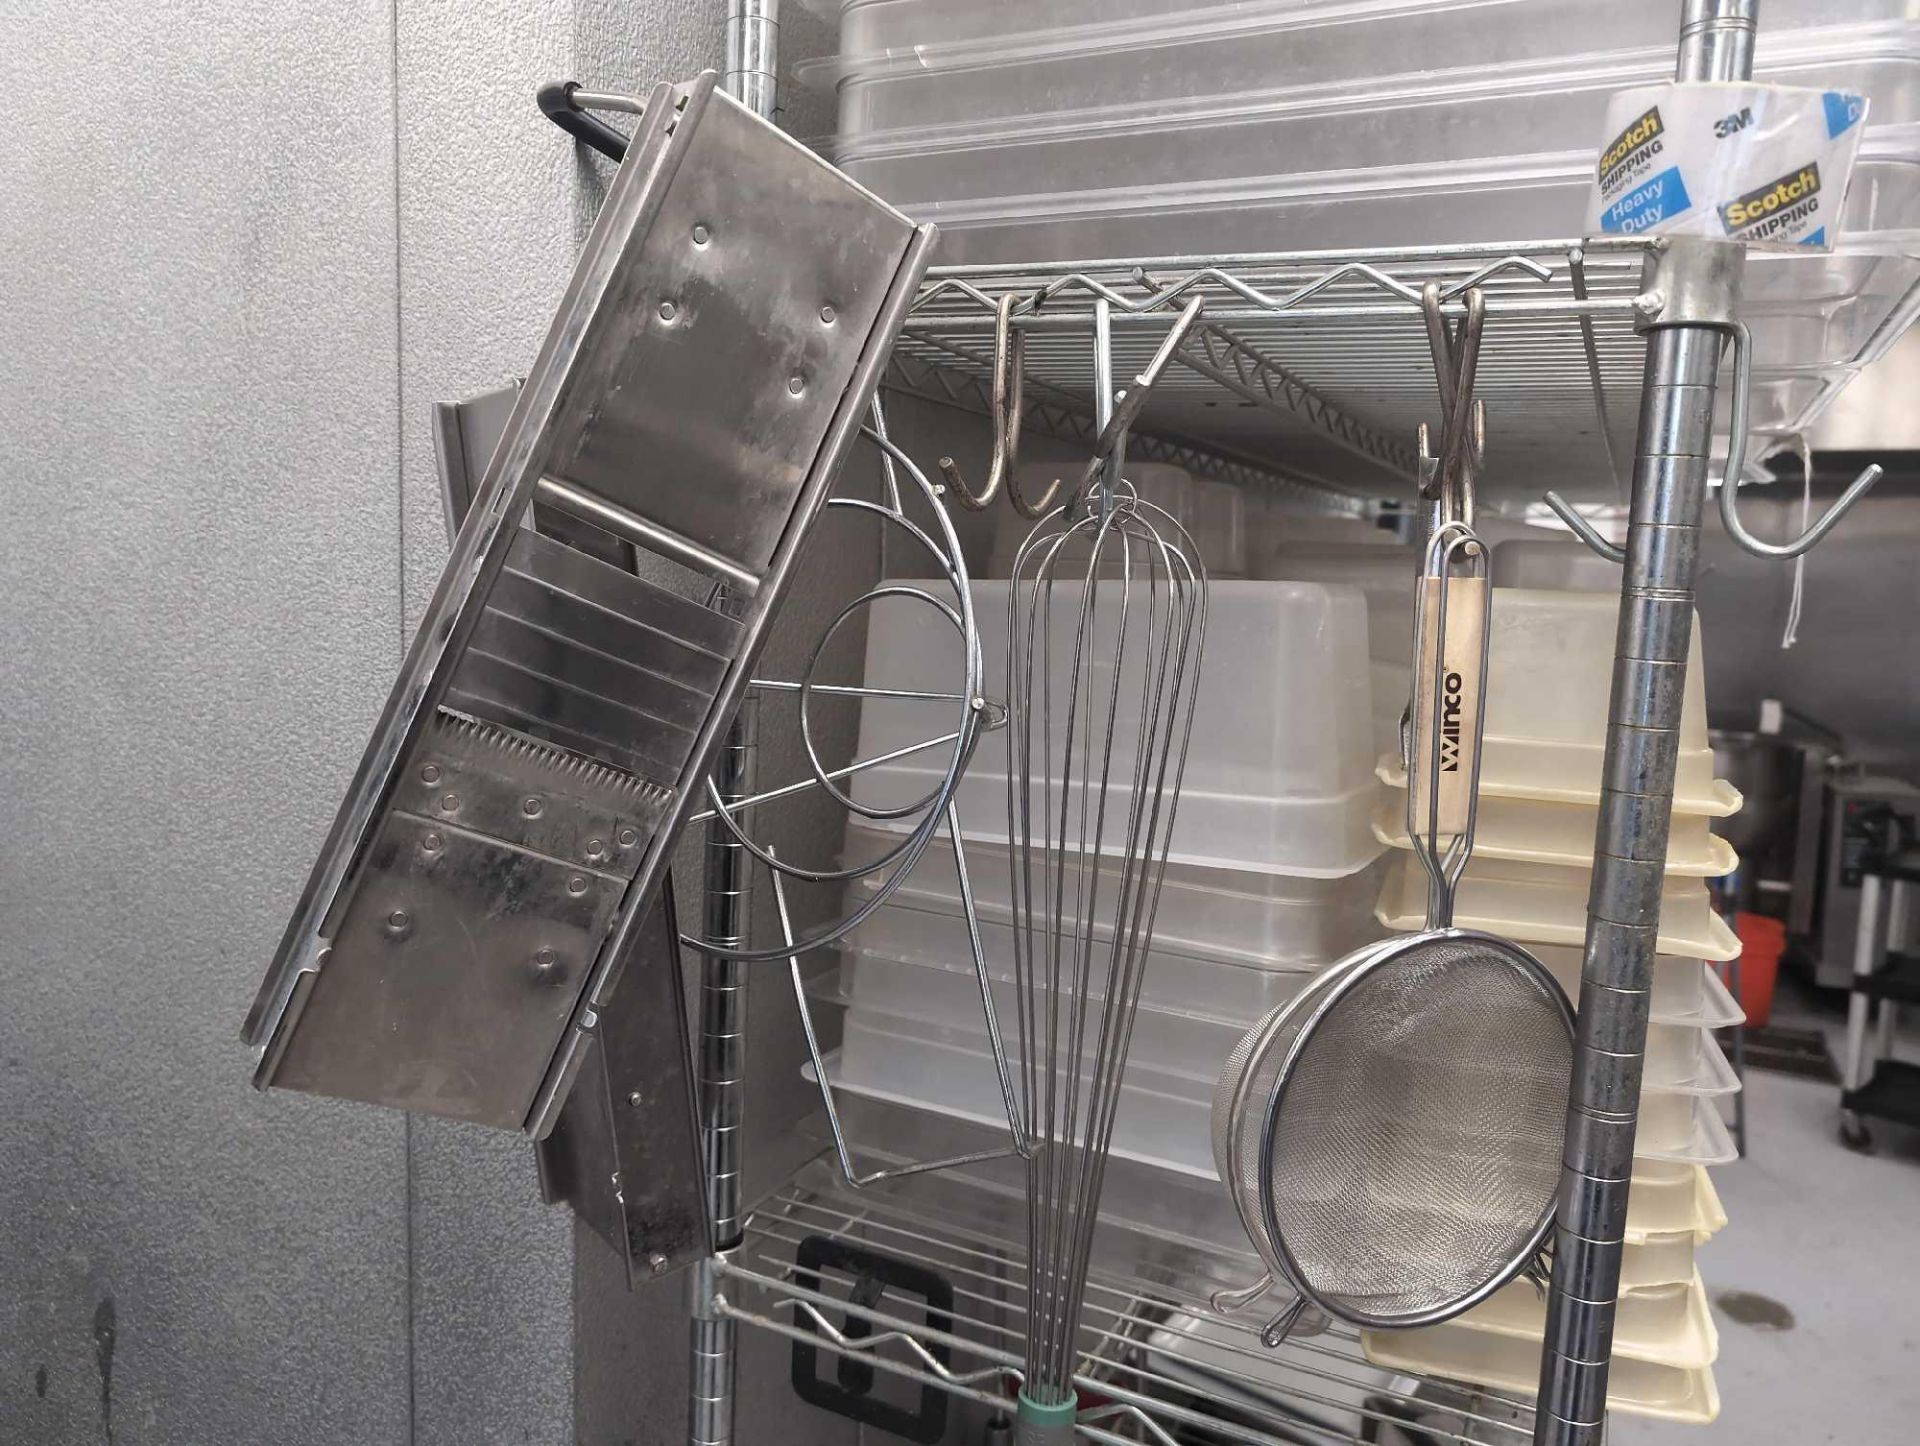 Stainless shelving unit with multiple plastic food containers. Strainers cheese, grater tomato slice - Image 3 of 8